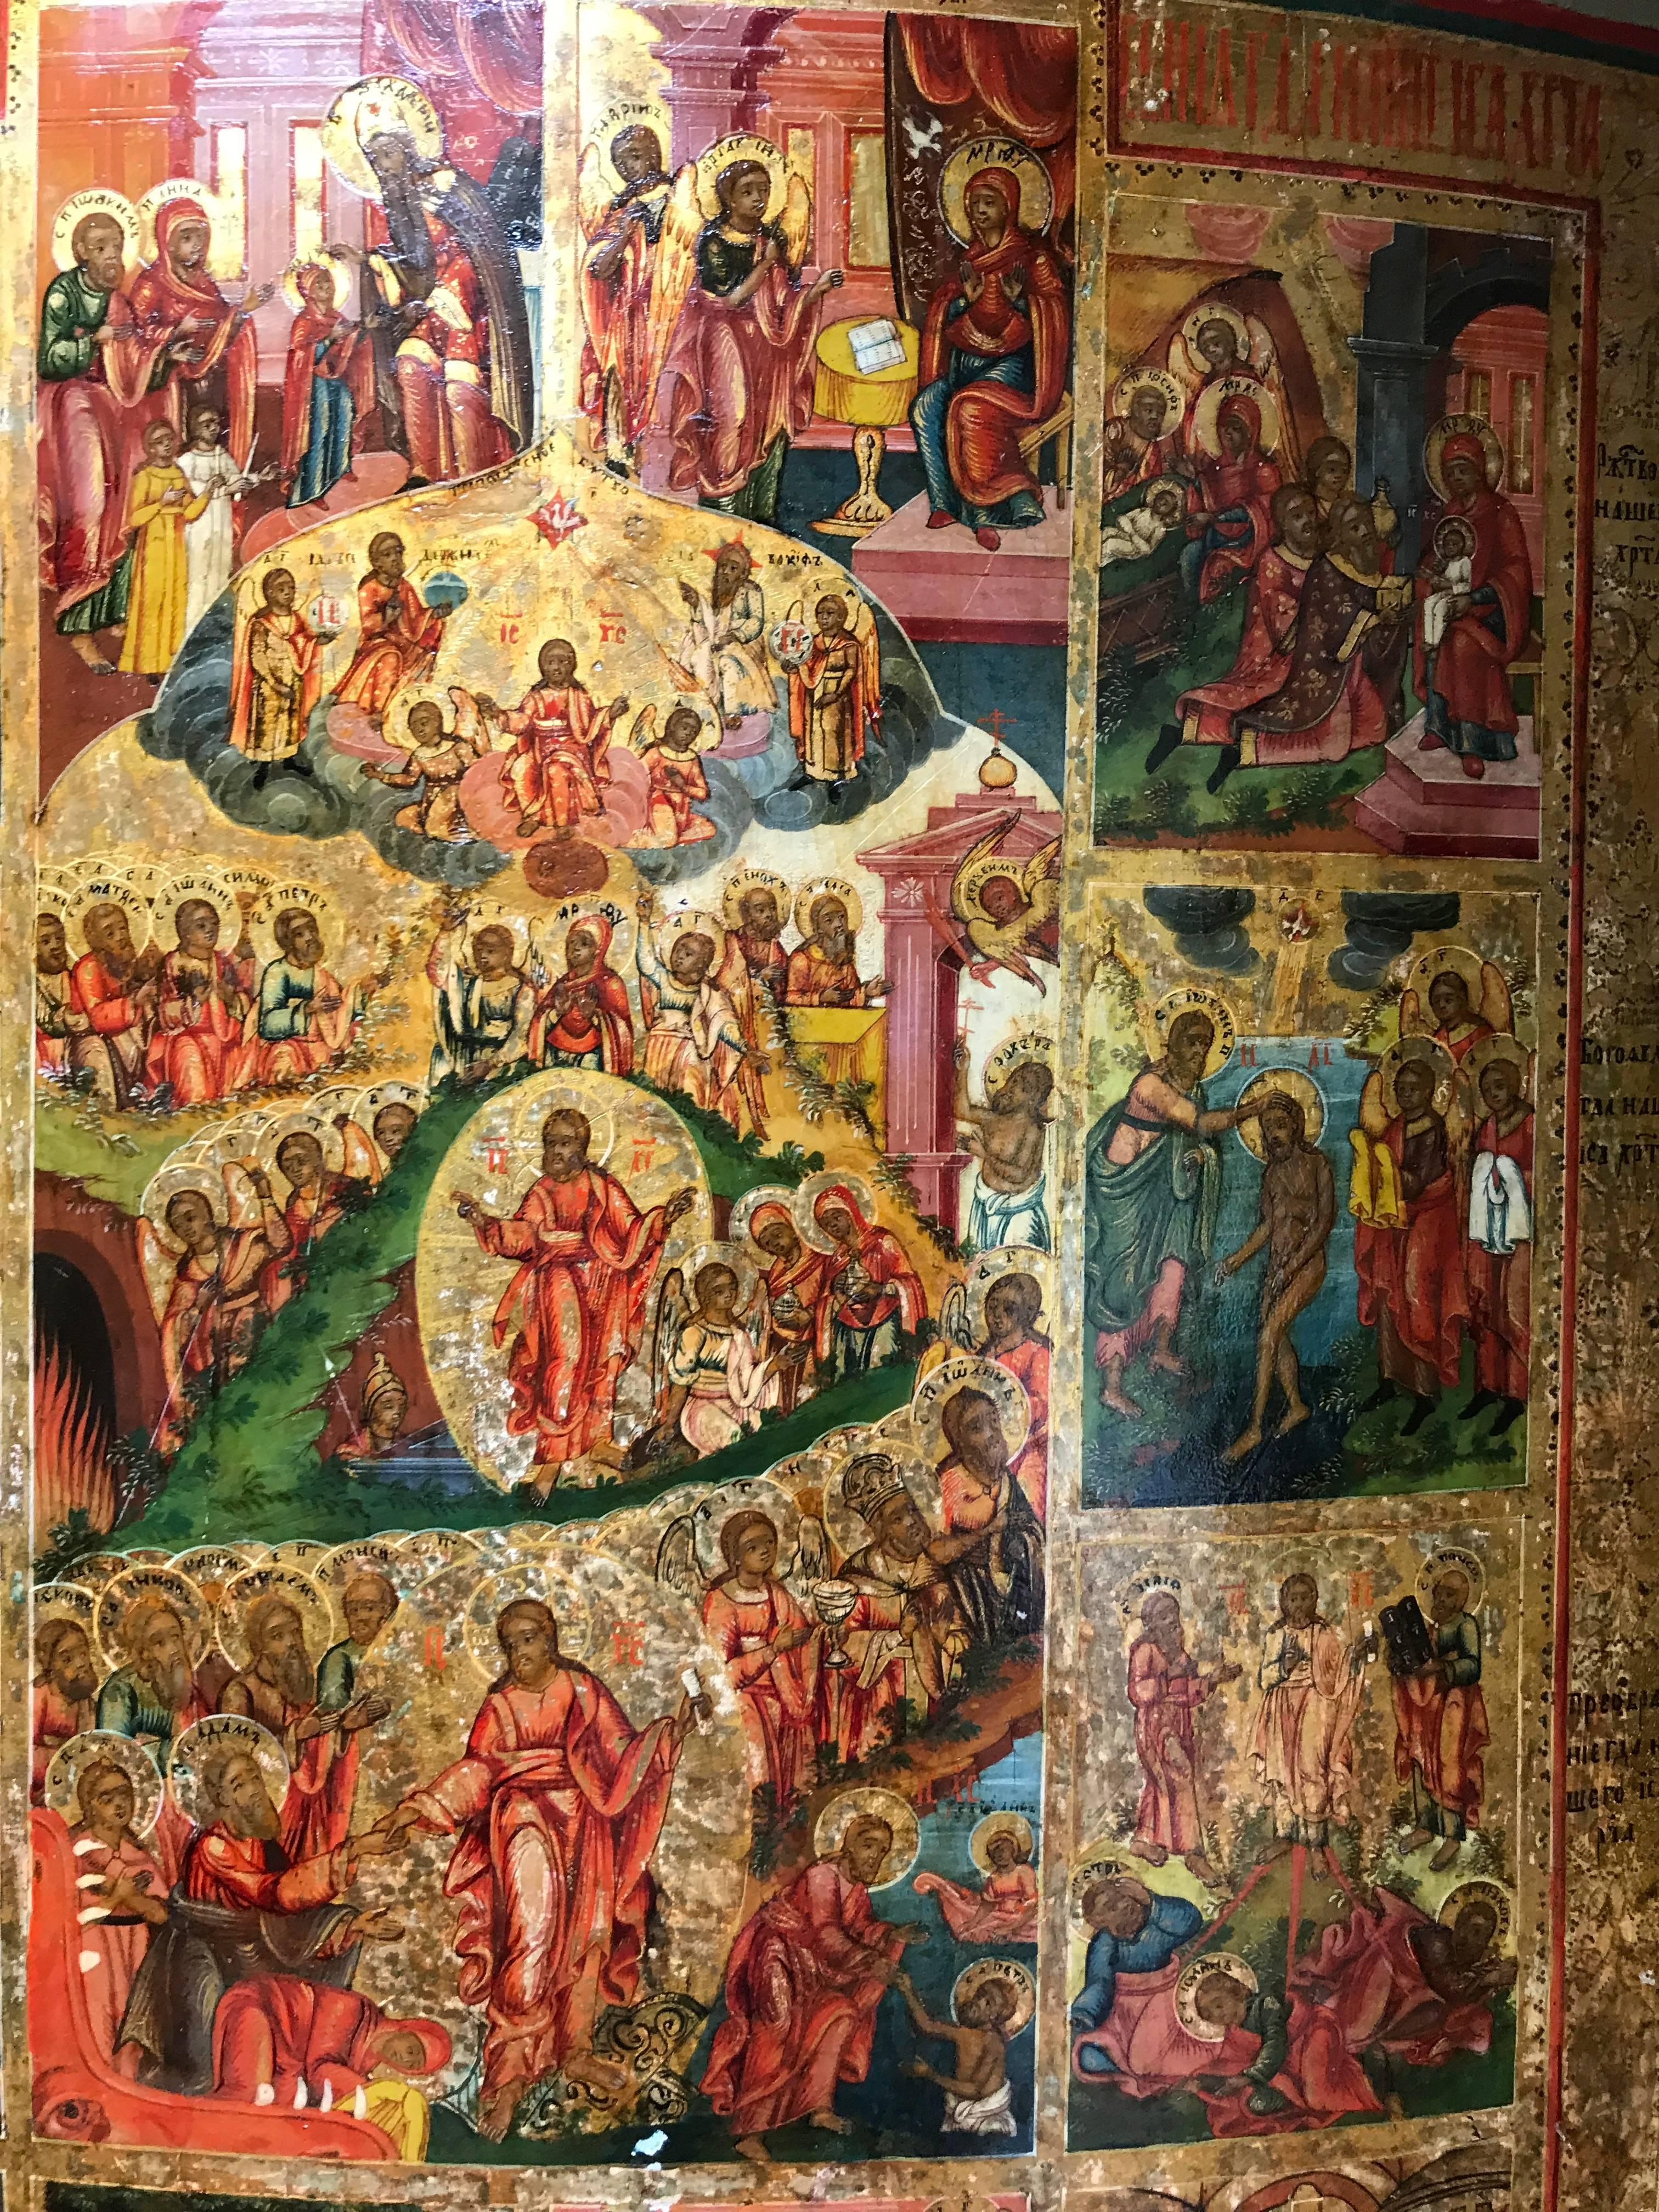 Sacred calendar
Russian Icon 1800-1850
Measures: 53.5 x 42.50 cm
Attested
Highest quality and best color preservation.

           